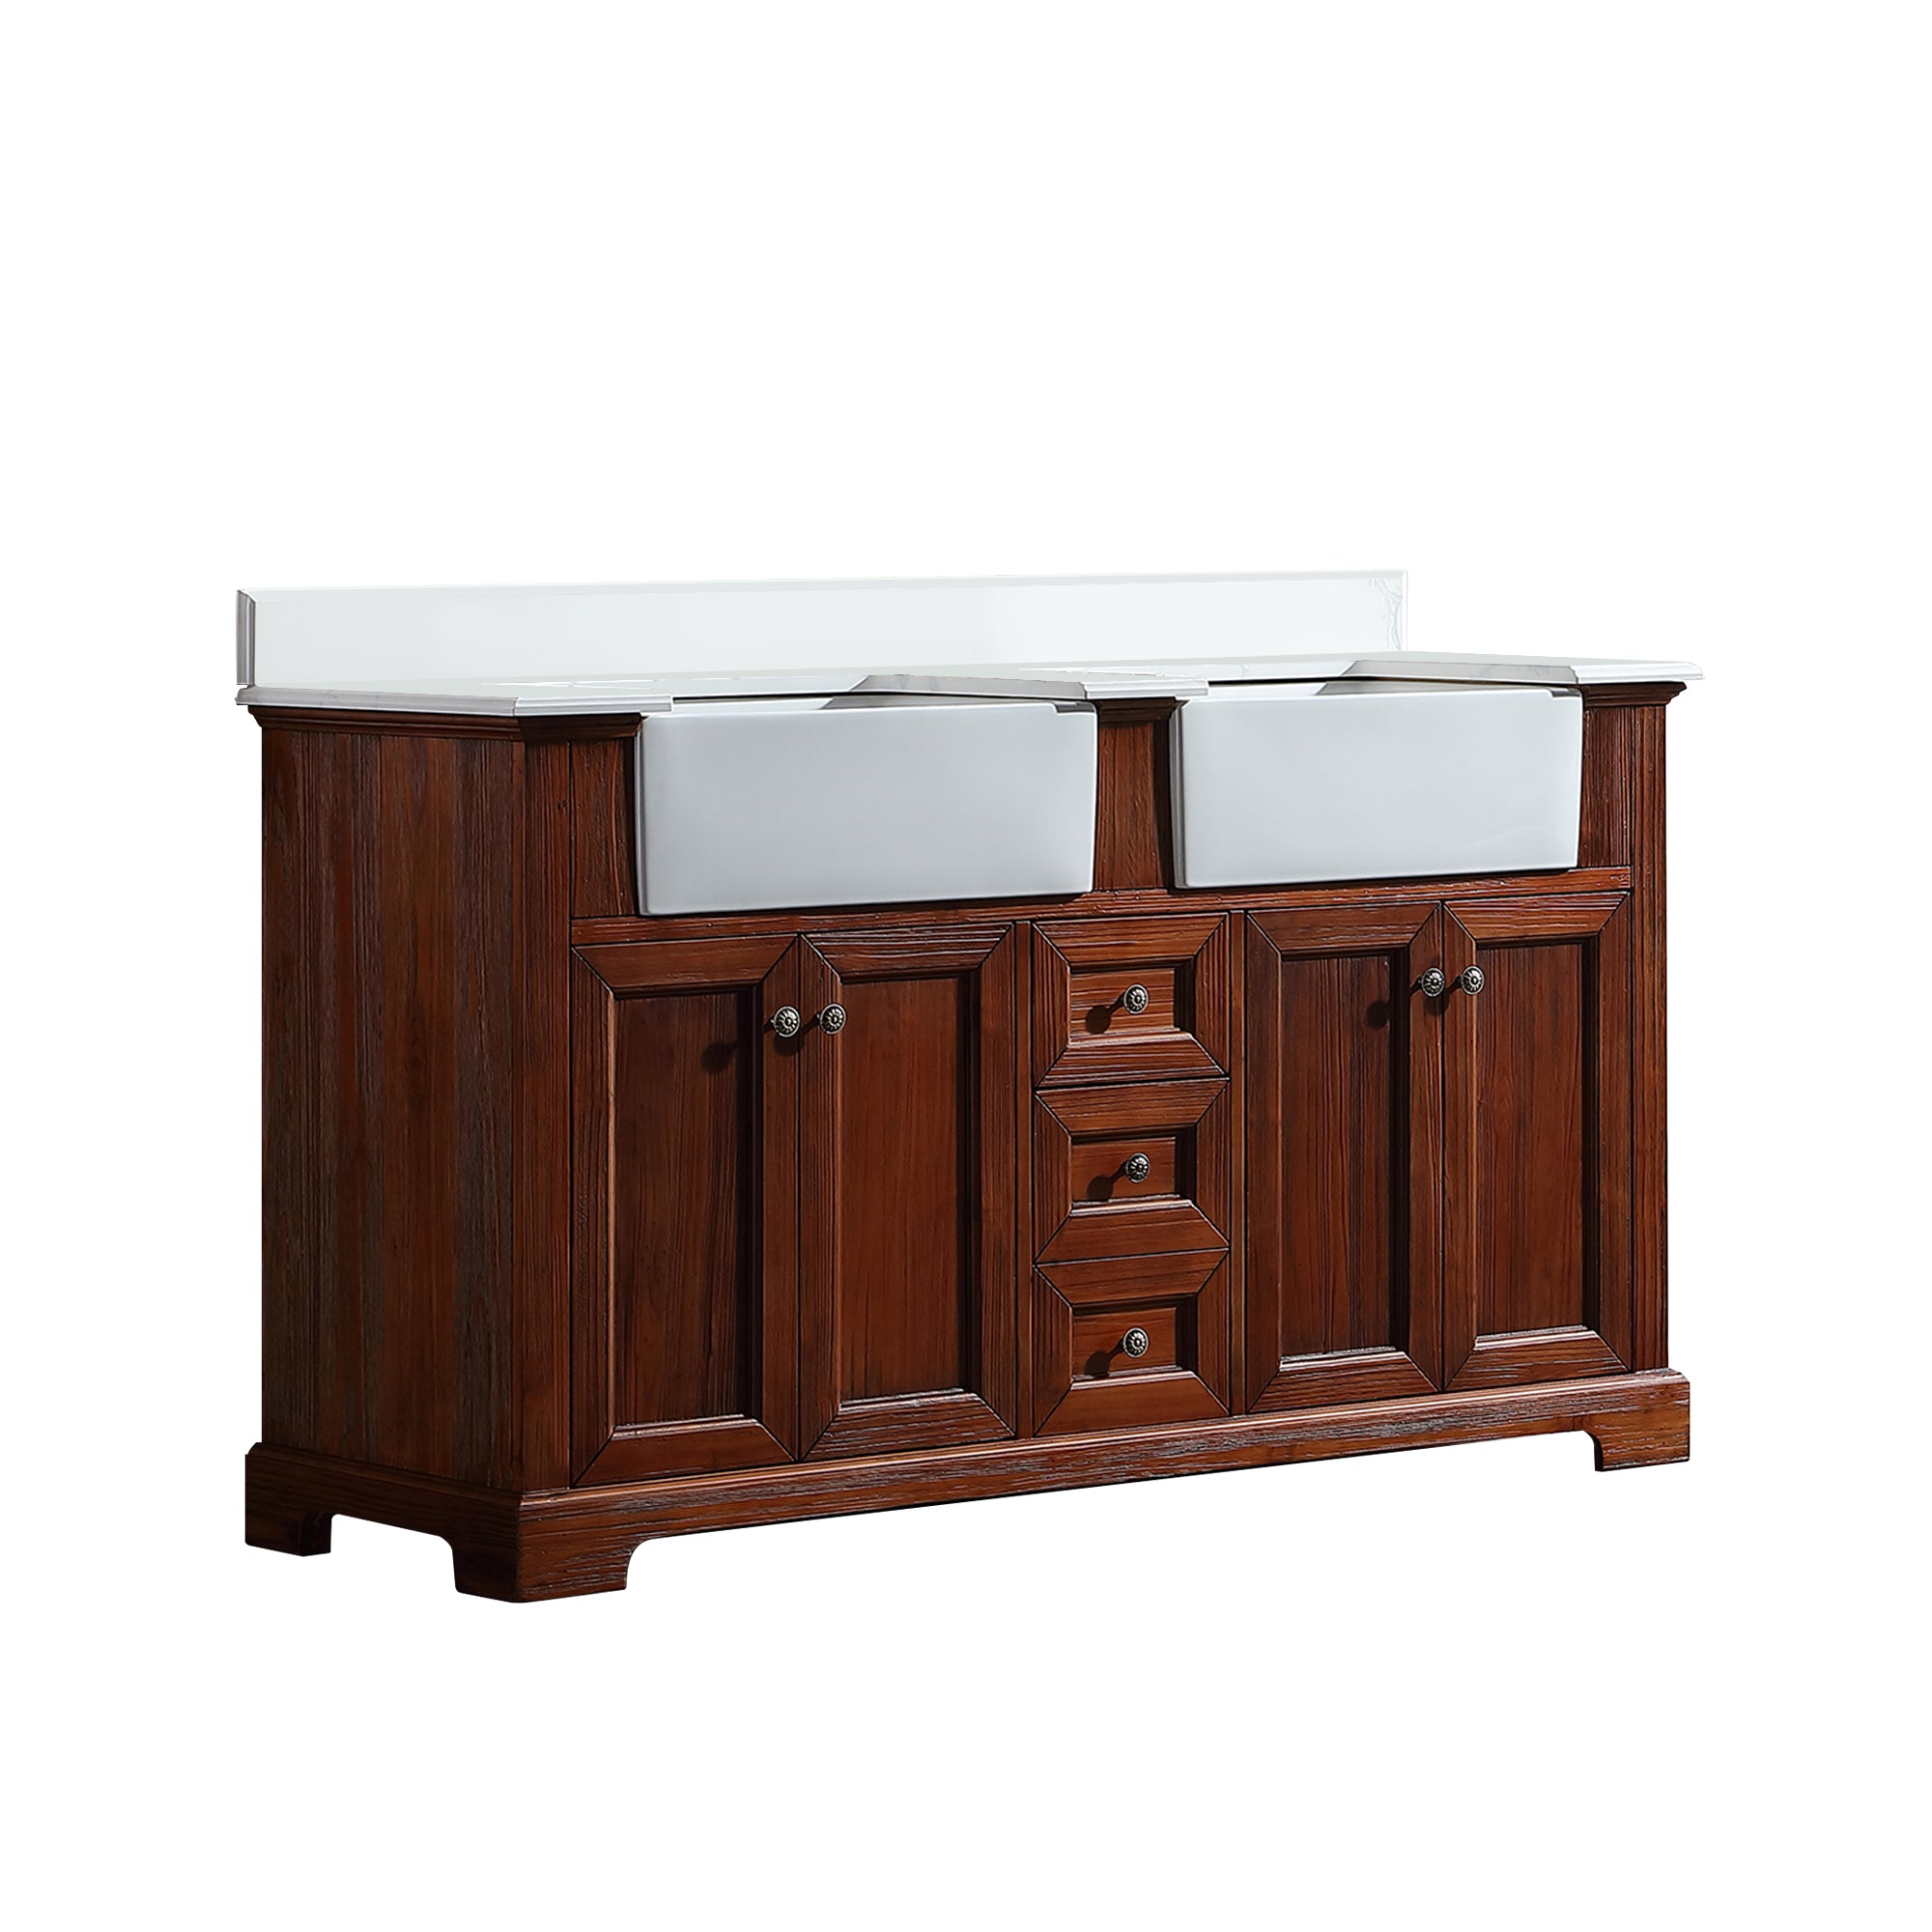 60" Freestanding Bath Vanity Wood in Brown with White Quartz Top with White Basin